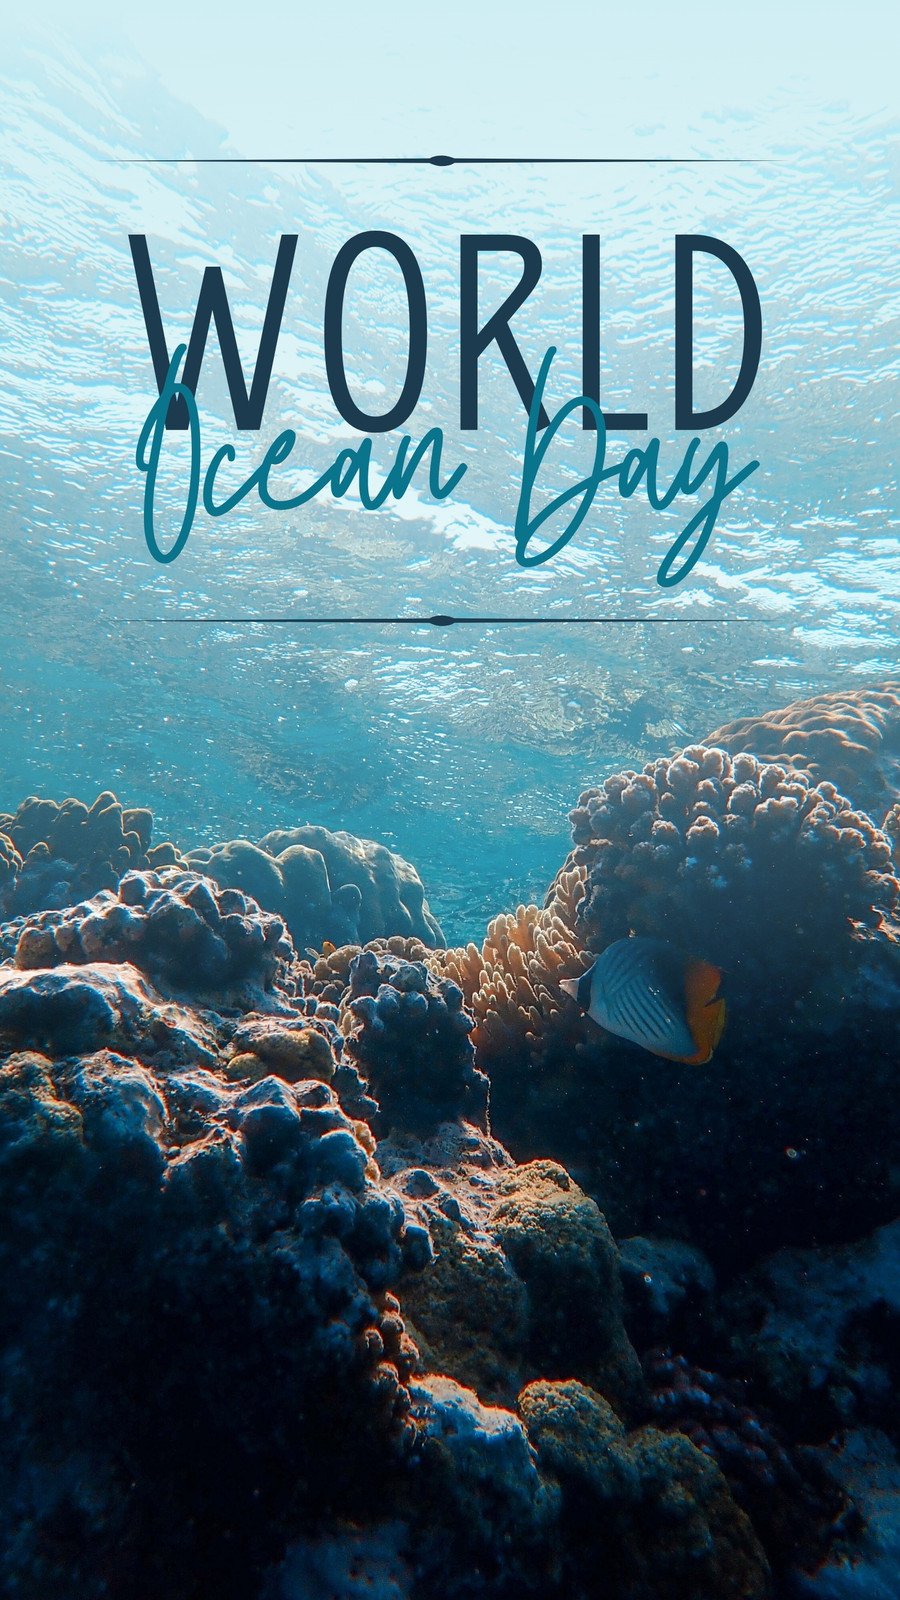 Page 4 - Free and customizable ocean templates